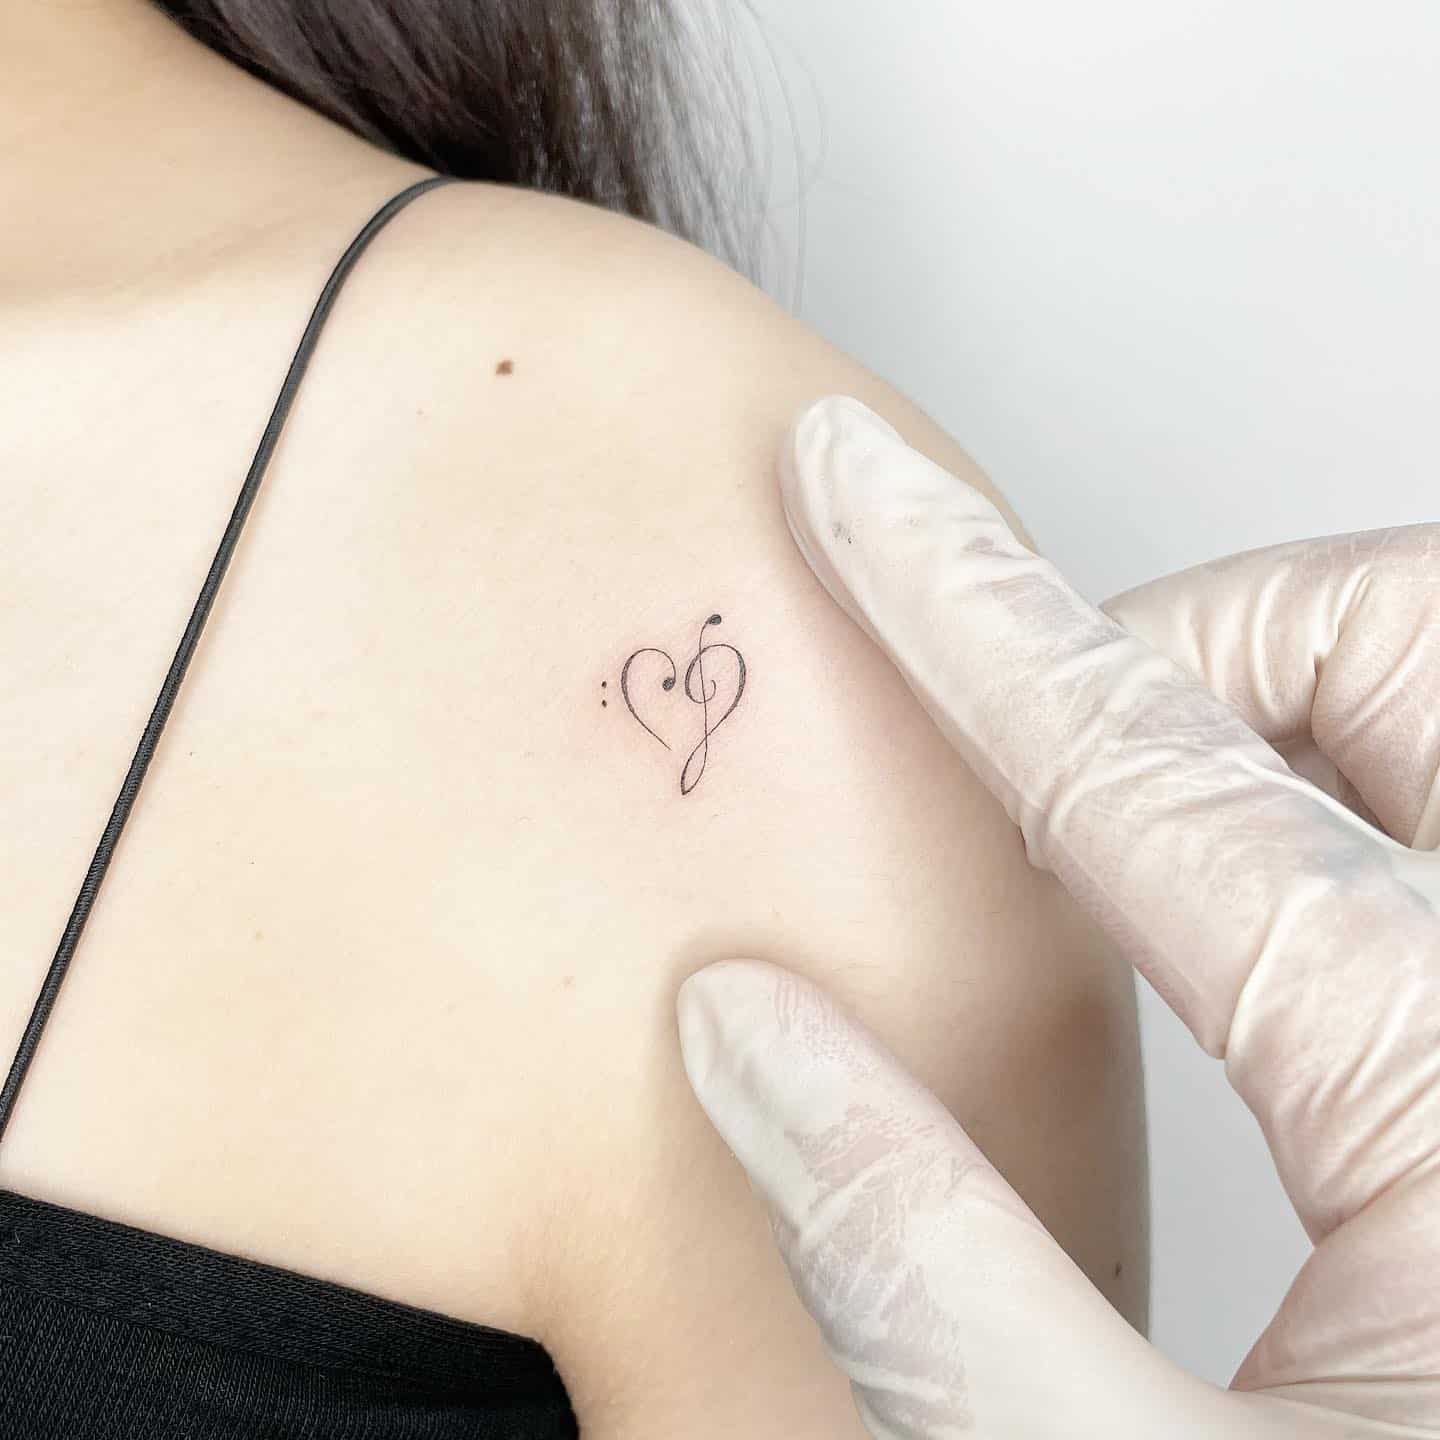 Music with heart tattoo by sop tattoo